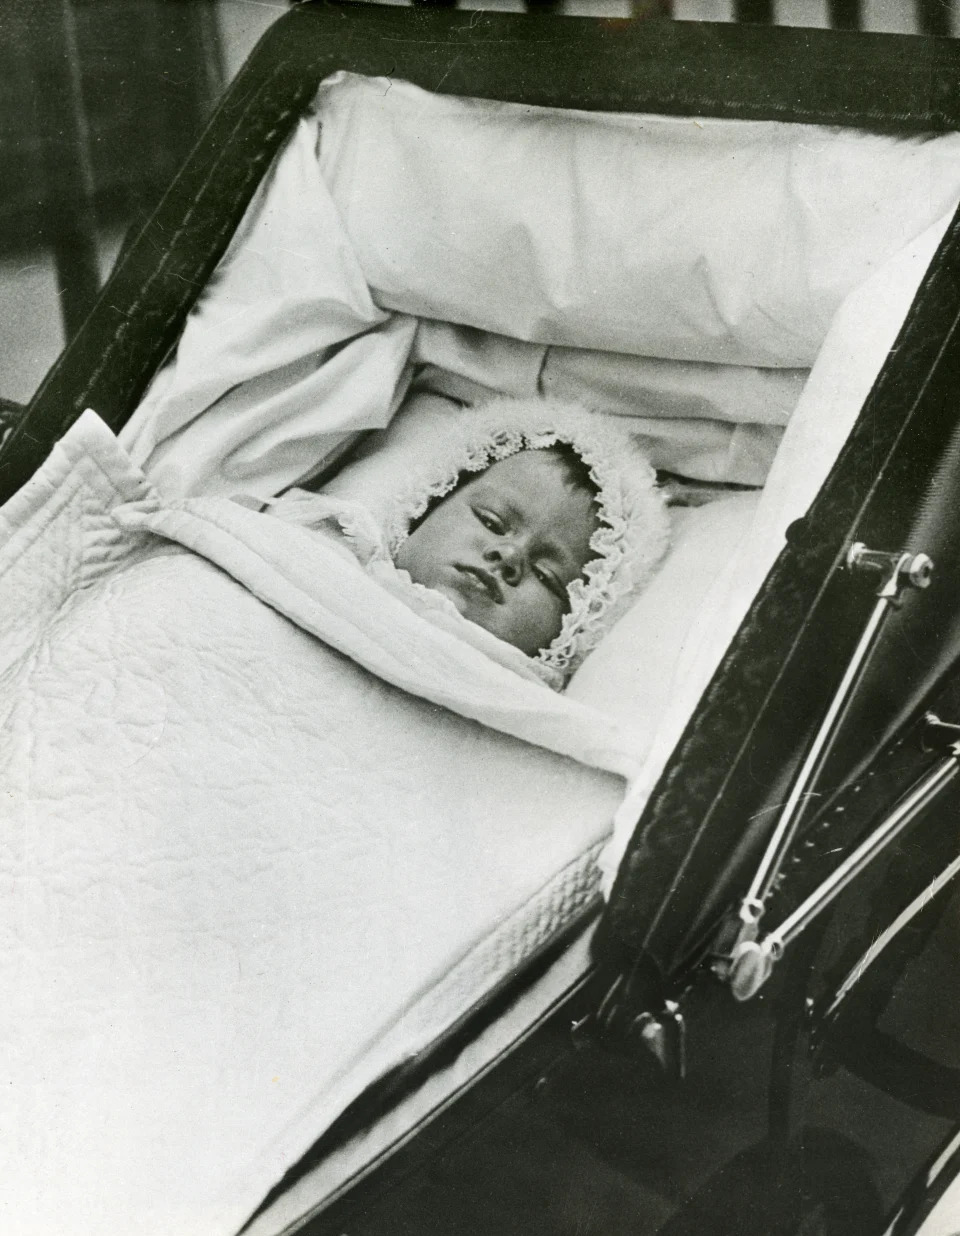 <p>Princess Elizabeth of York, the future Queen, pictured on 9 October 1926. She was delivered by caesarean section at 2.40am on 21 April 1926, at her maternal grandfather's house at 17 Bruton Street, Mayfair, London. (Getty Images)</p> 